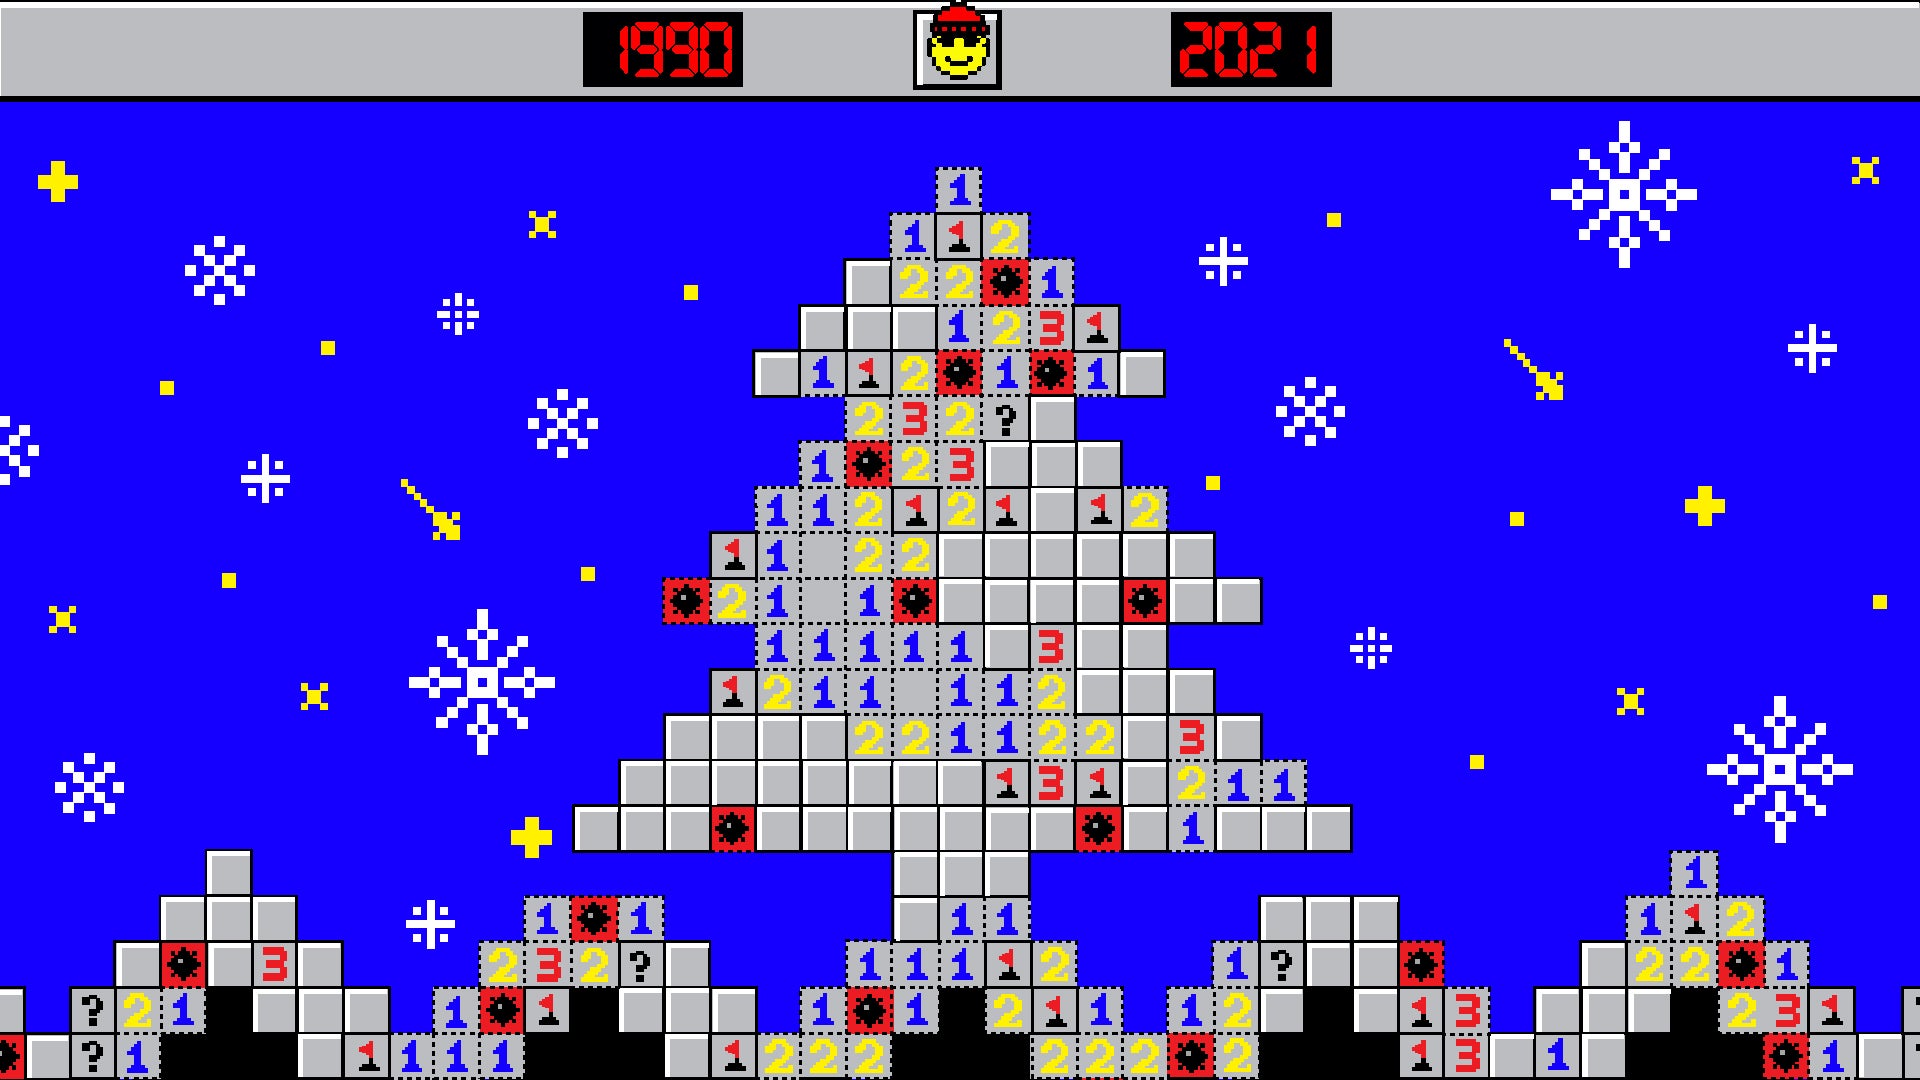 The artwork from Microsoft's Minesweeper Ugly Christmas Sweater.